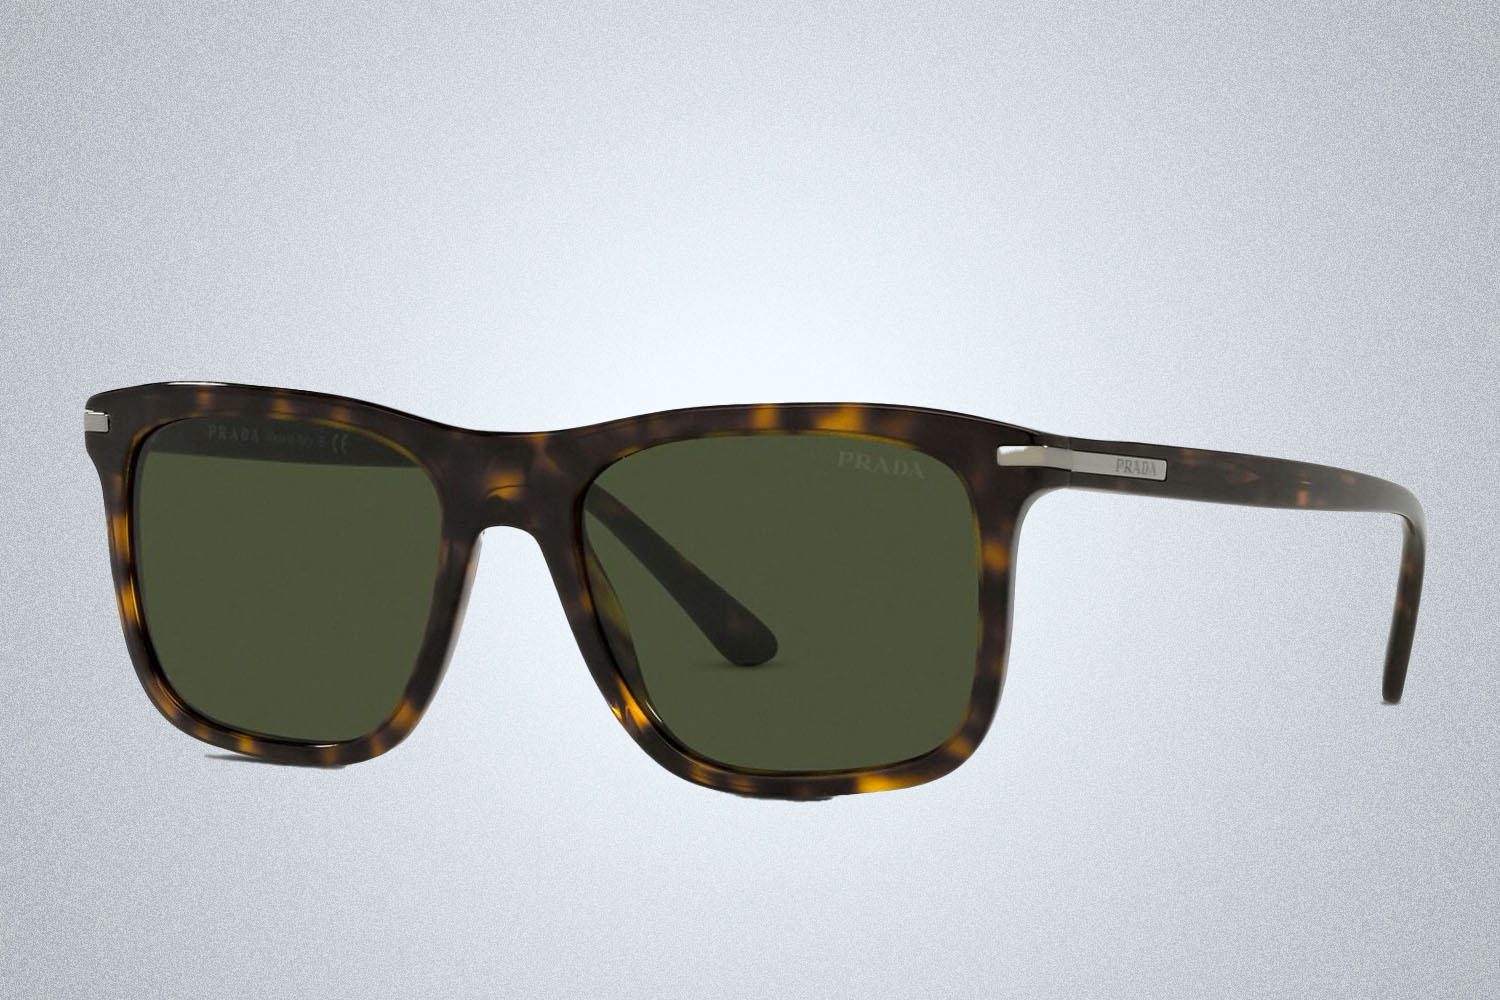 a pair of designer sunglasses from Prada on a grey background